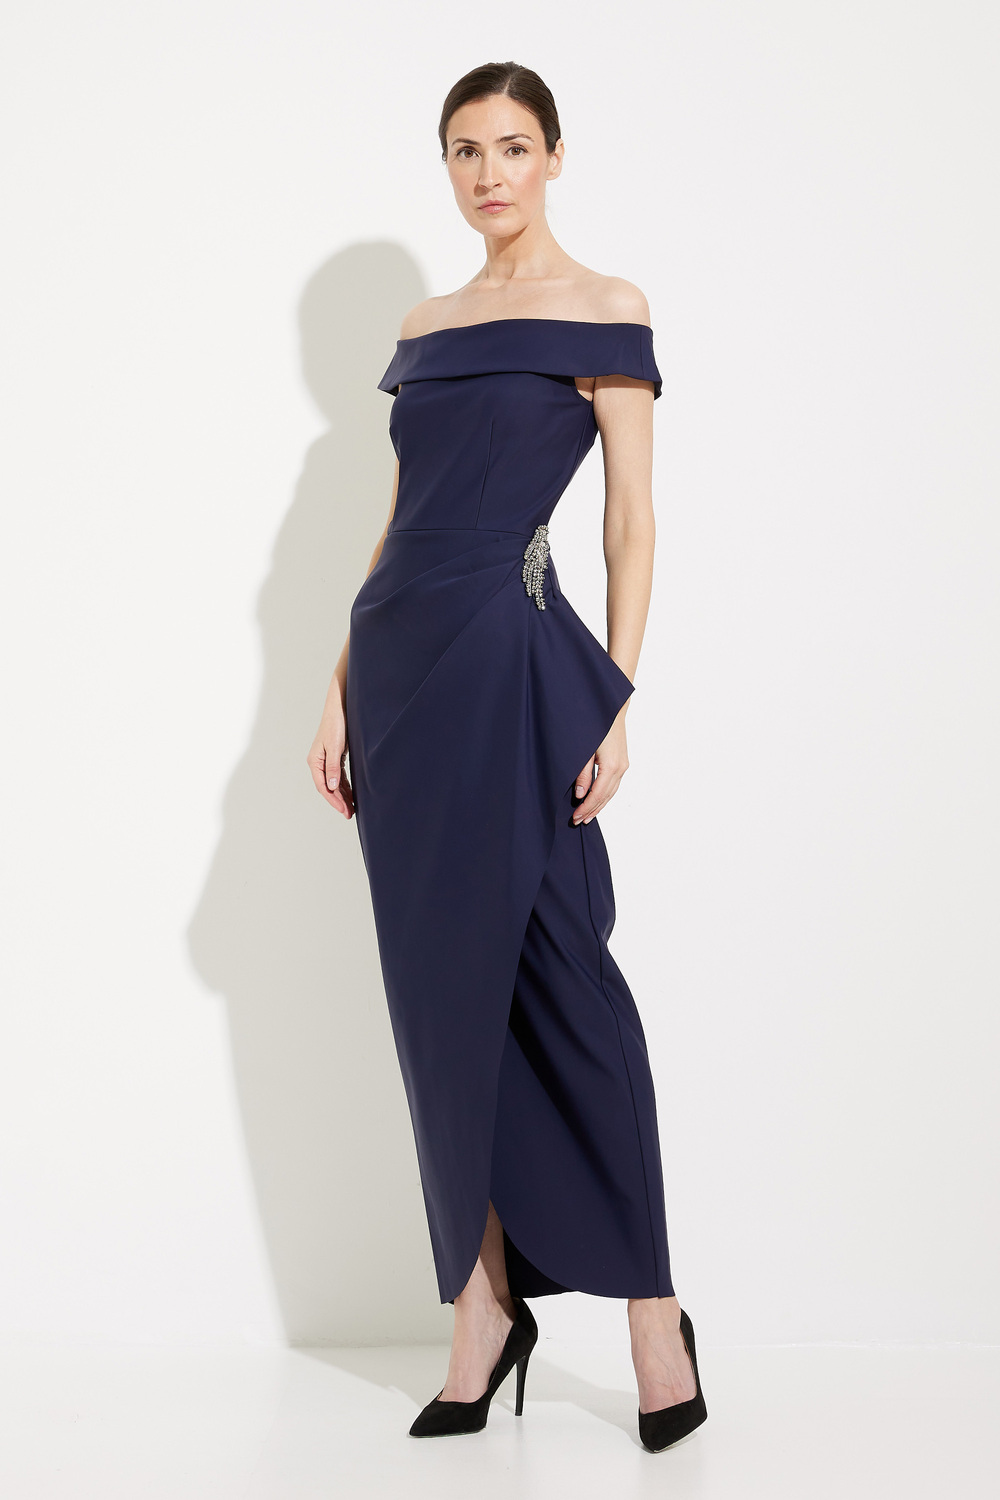 Off-the-Shoulder Embellished Gown Style 134164. Navy